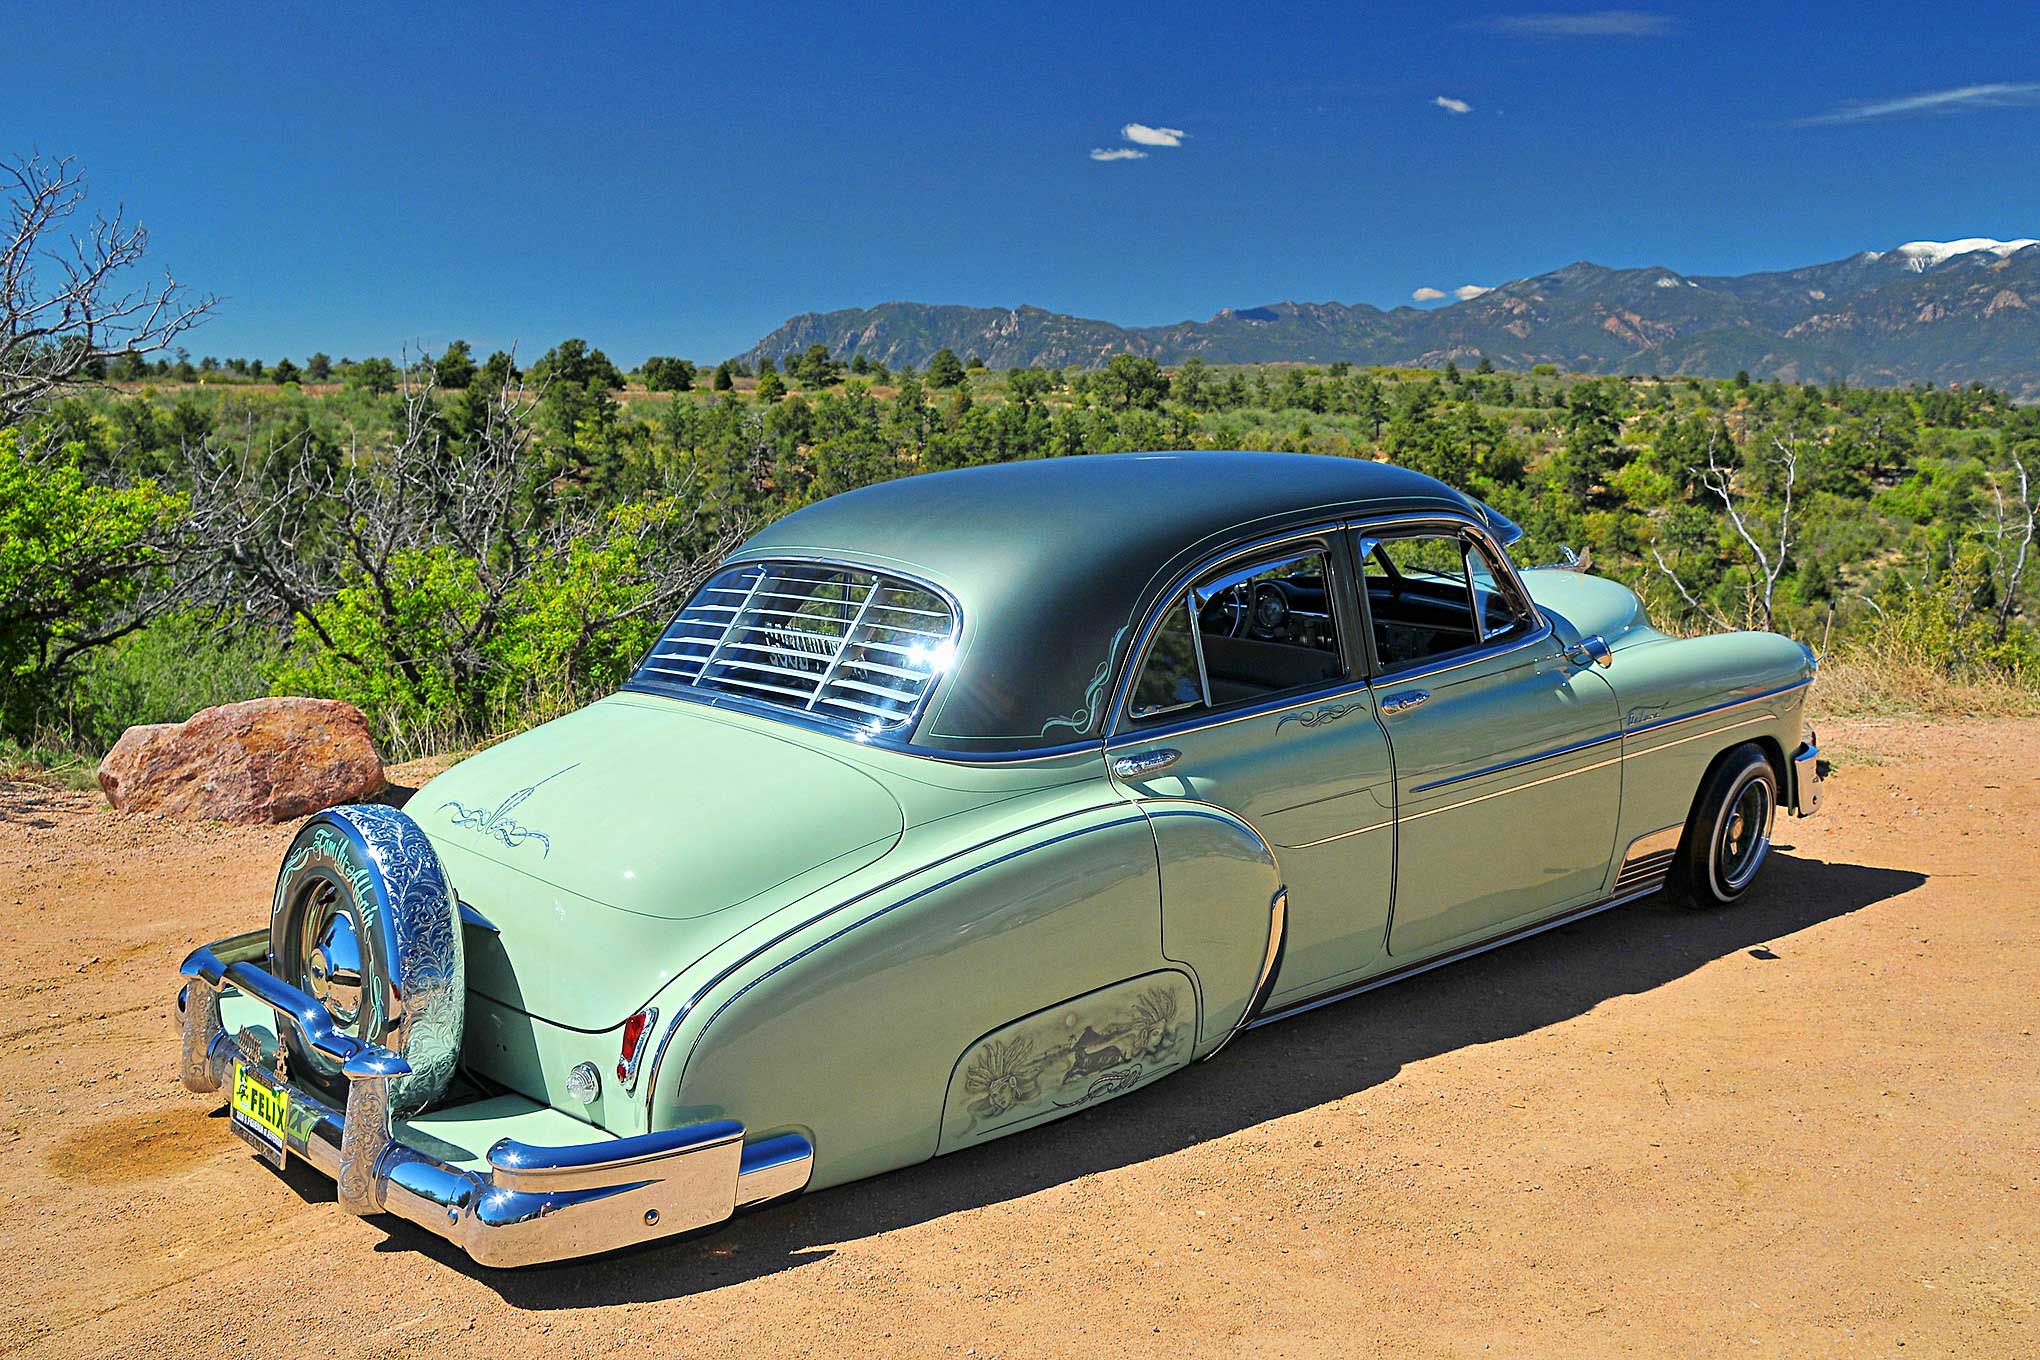 1950 Chevrolet DeLuxe - When One Isn't Enough